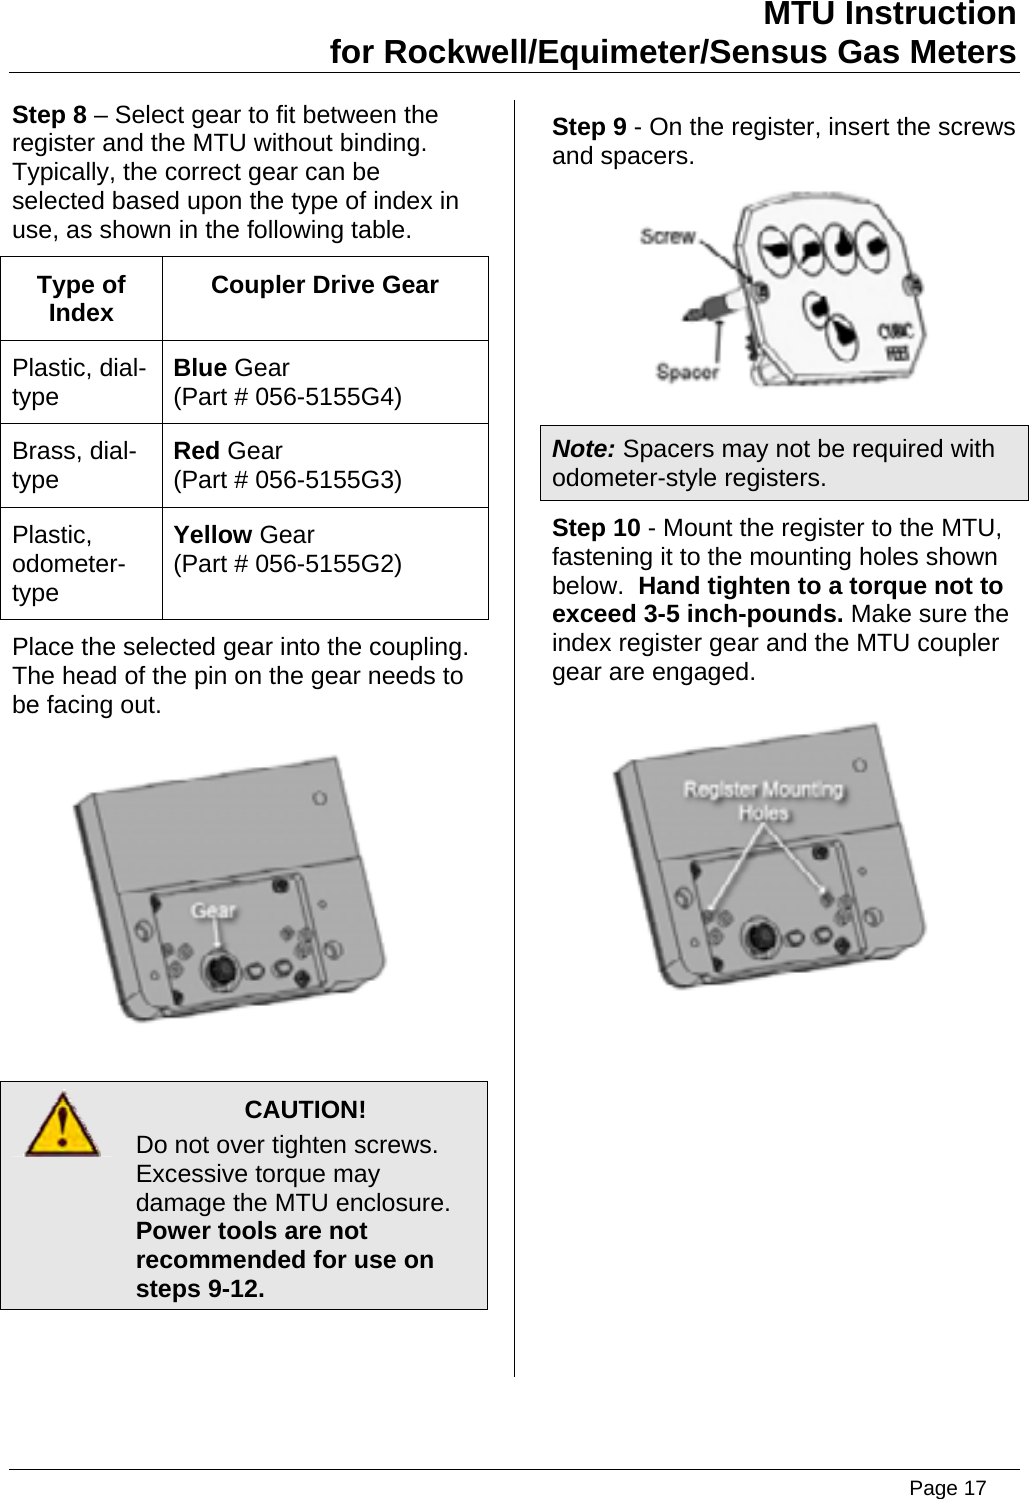 MTU Instruction for Rockwell/Equimeter/Sensus Gas Meters   Step 8 – Select gear to fit between the register and the MTU without binding.  Typically, the correct gear can be selected based upon the type of index in use, as shown in the following table. Type of Index  Coupler Drive Gear Plastic, dial-type  Blue Gear (Part # 056-5155G4) Brass, dial-type  Red Gear (Part # 056-5155G3) Plastic, odometer-type Yellow Gear (Part # 056-5155G2) Place the selected gear into the coupling. The head of the pin on the gear needs to be facing out.     CAUTION! Do not over tighten screws. Excessive torque may damage the MTU enclosure.   Power tools are not recommended for use on steps 9-12.  Step 9 - On the register, insert the screws and spacers.  Note: Spacers may not be required with odometer-style registers. Step 10 - Mount the register to the MTU, fastening it to the mounting holes shown below.  Hand tighten to a torque not to exceed 3-5 inch-pounds. Make sure the index register gear and the MTU coupler gear are engaged.  Page 17